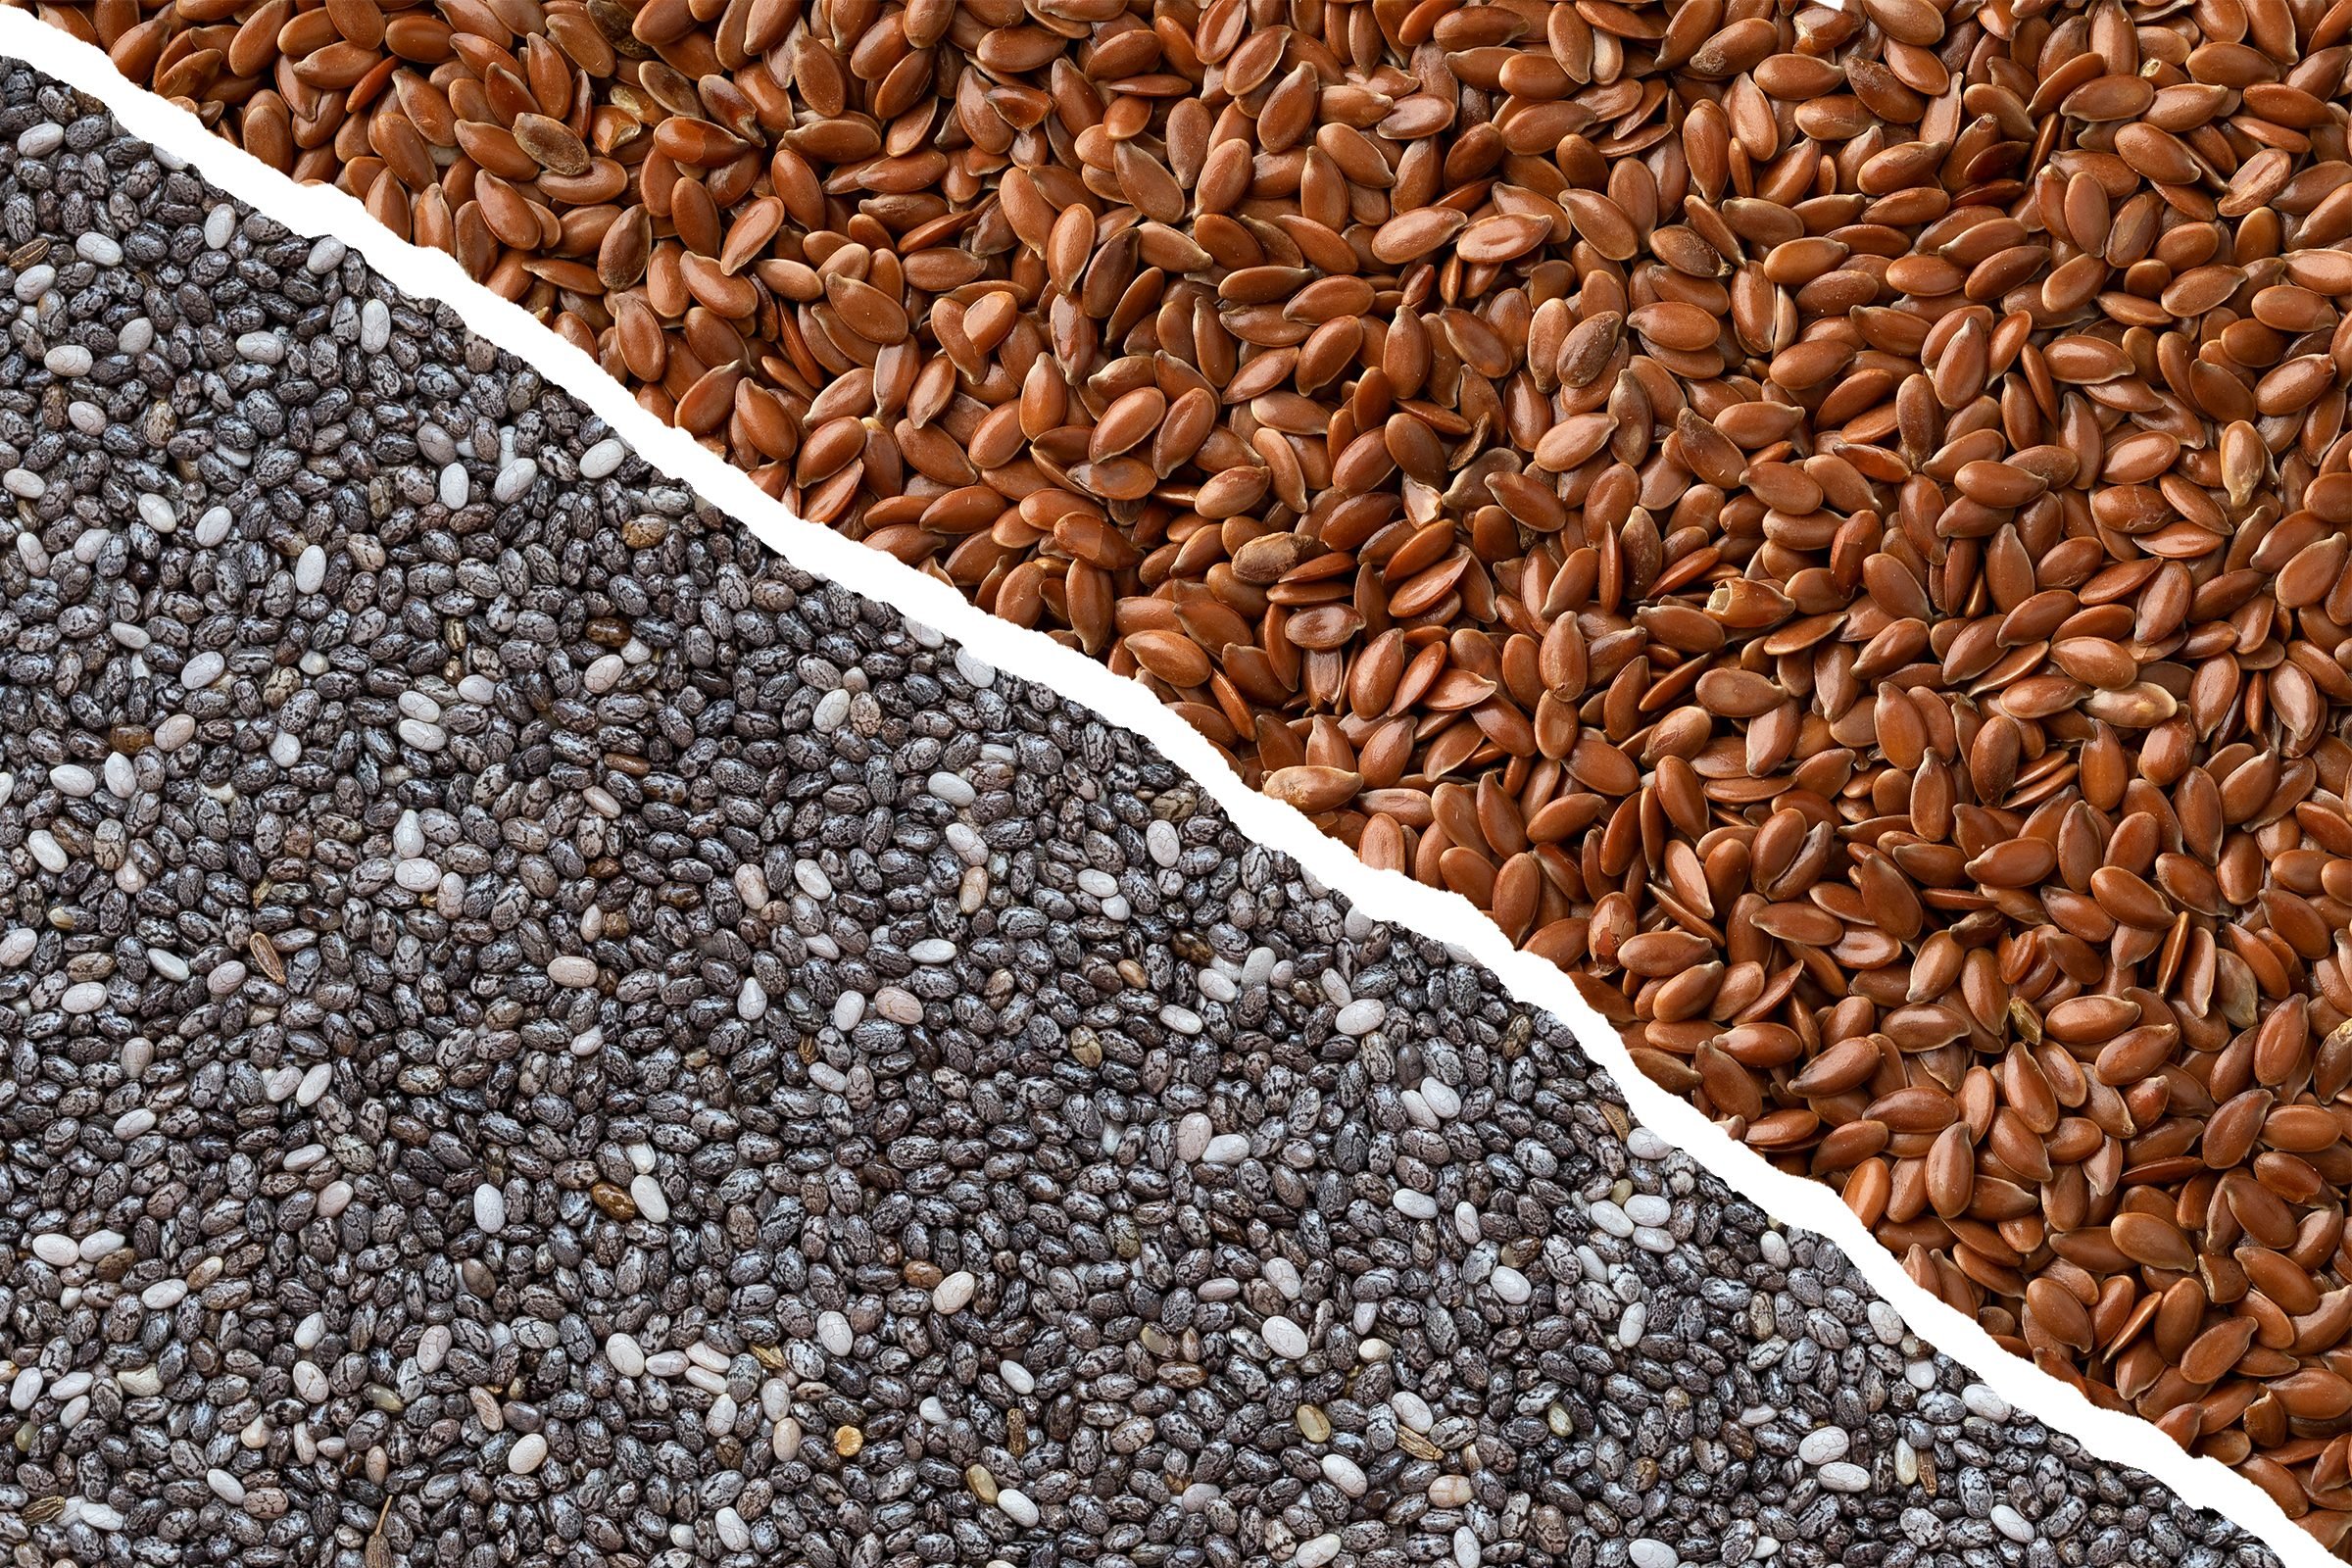 Flaxseed and Linseed: What's the Difference?